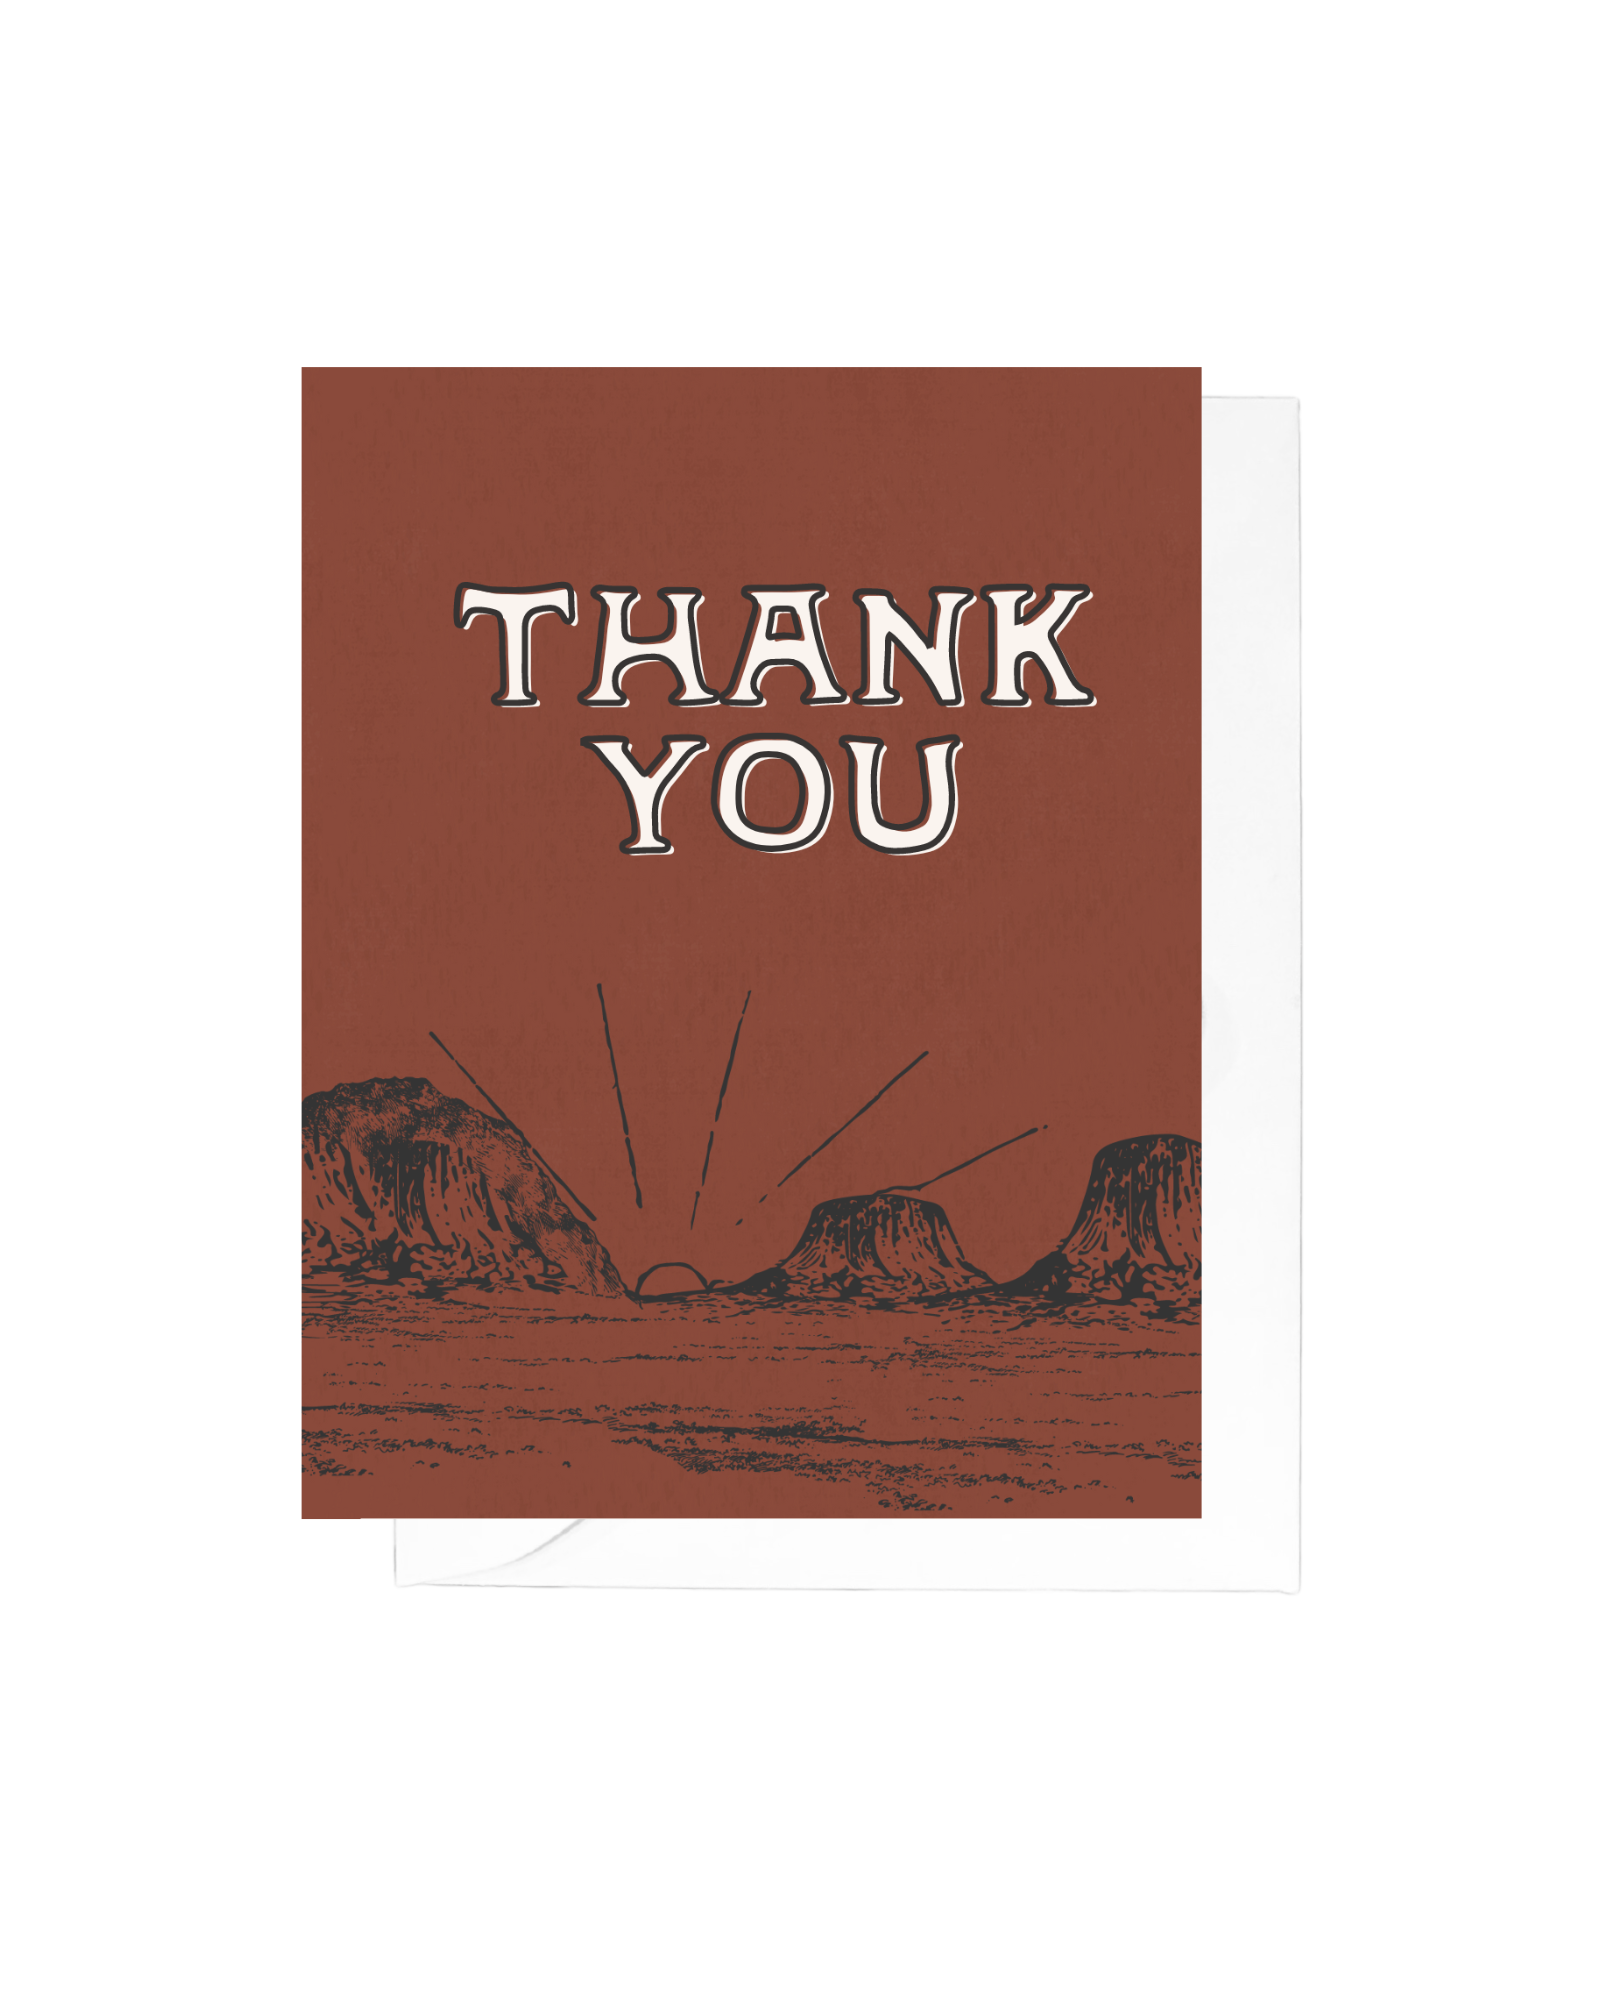 Rust brown greeting card with black desert landscape and the words "thank you" top center